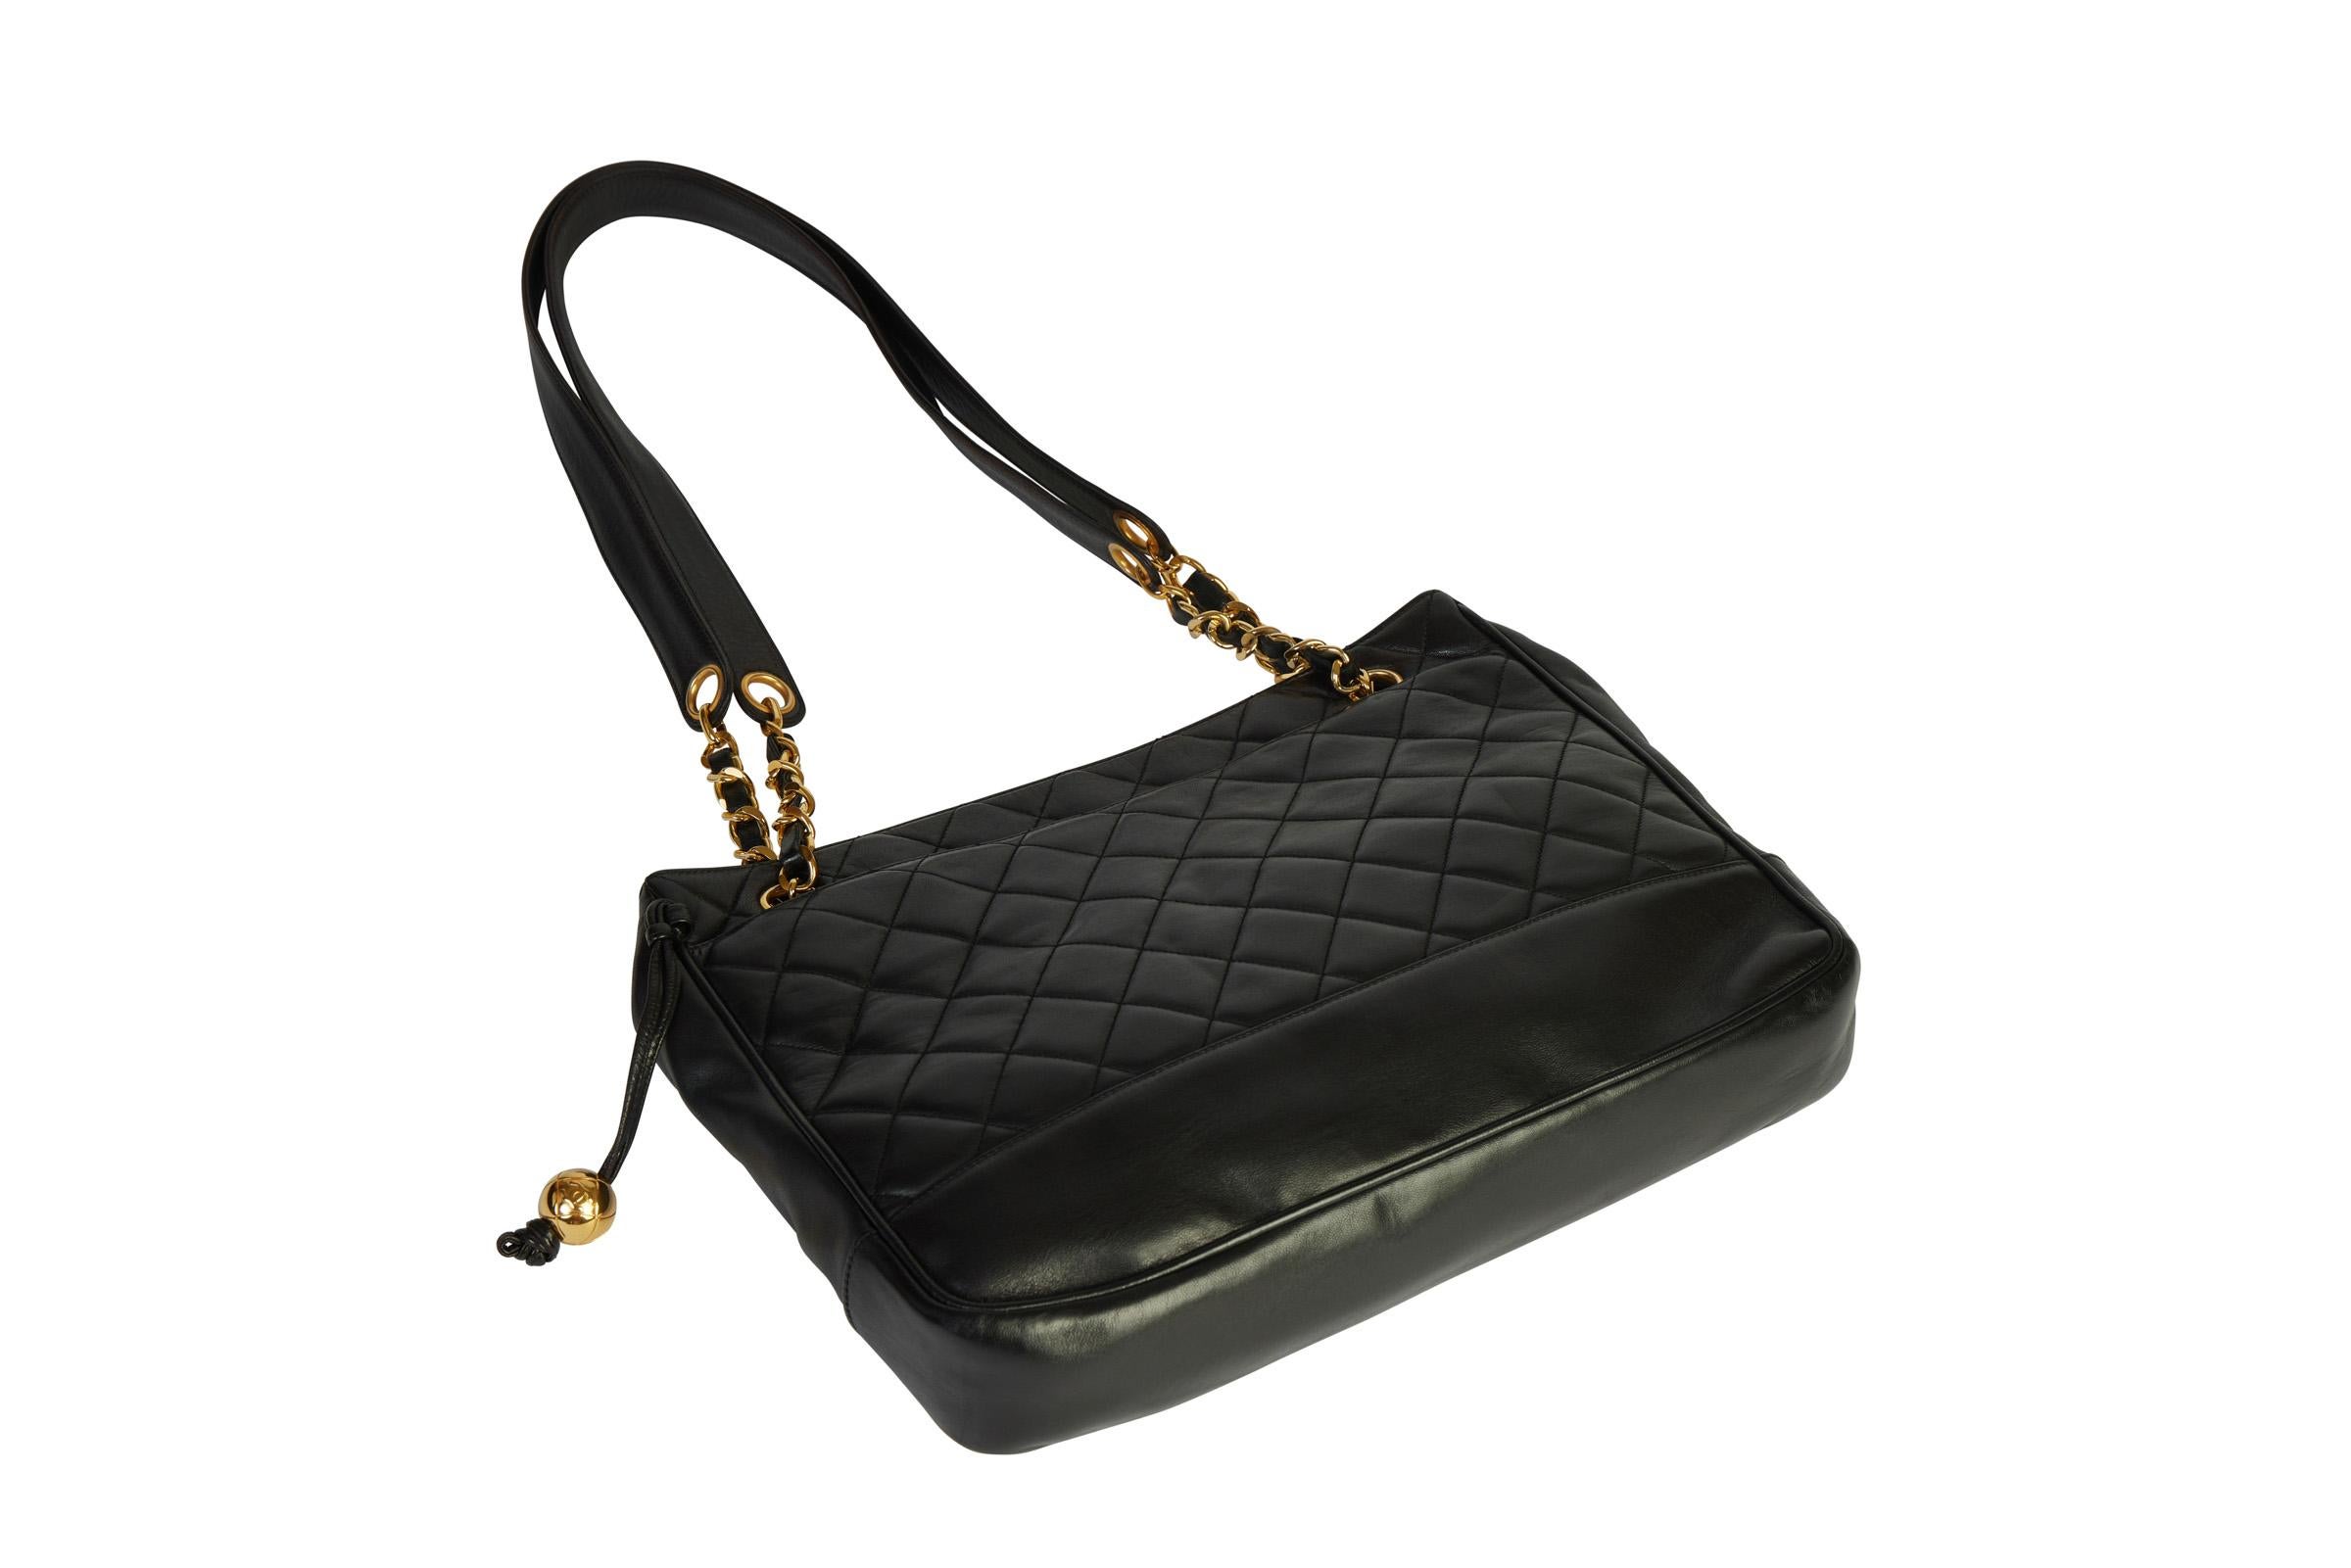 Chanel Vintage Black Quilted Zipper Tote In Good Condition For Sale In West Hollywood, CA